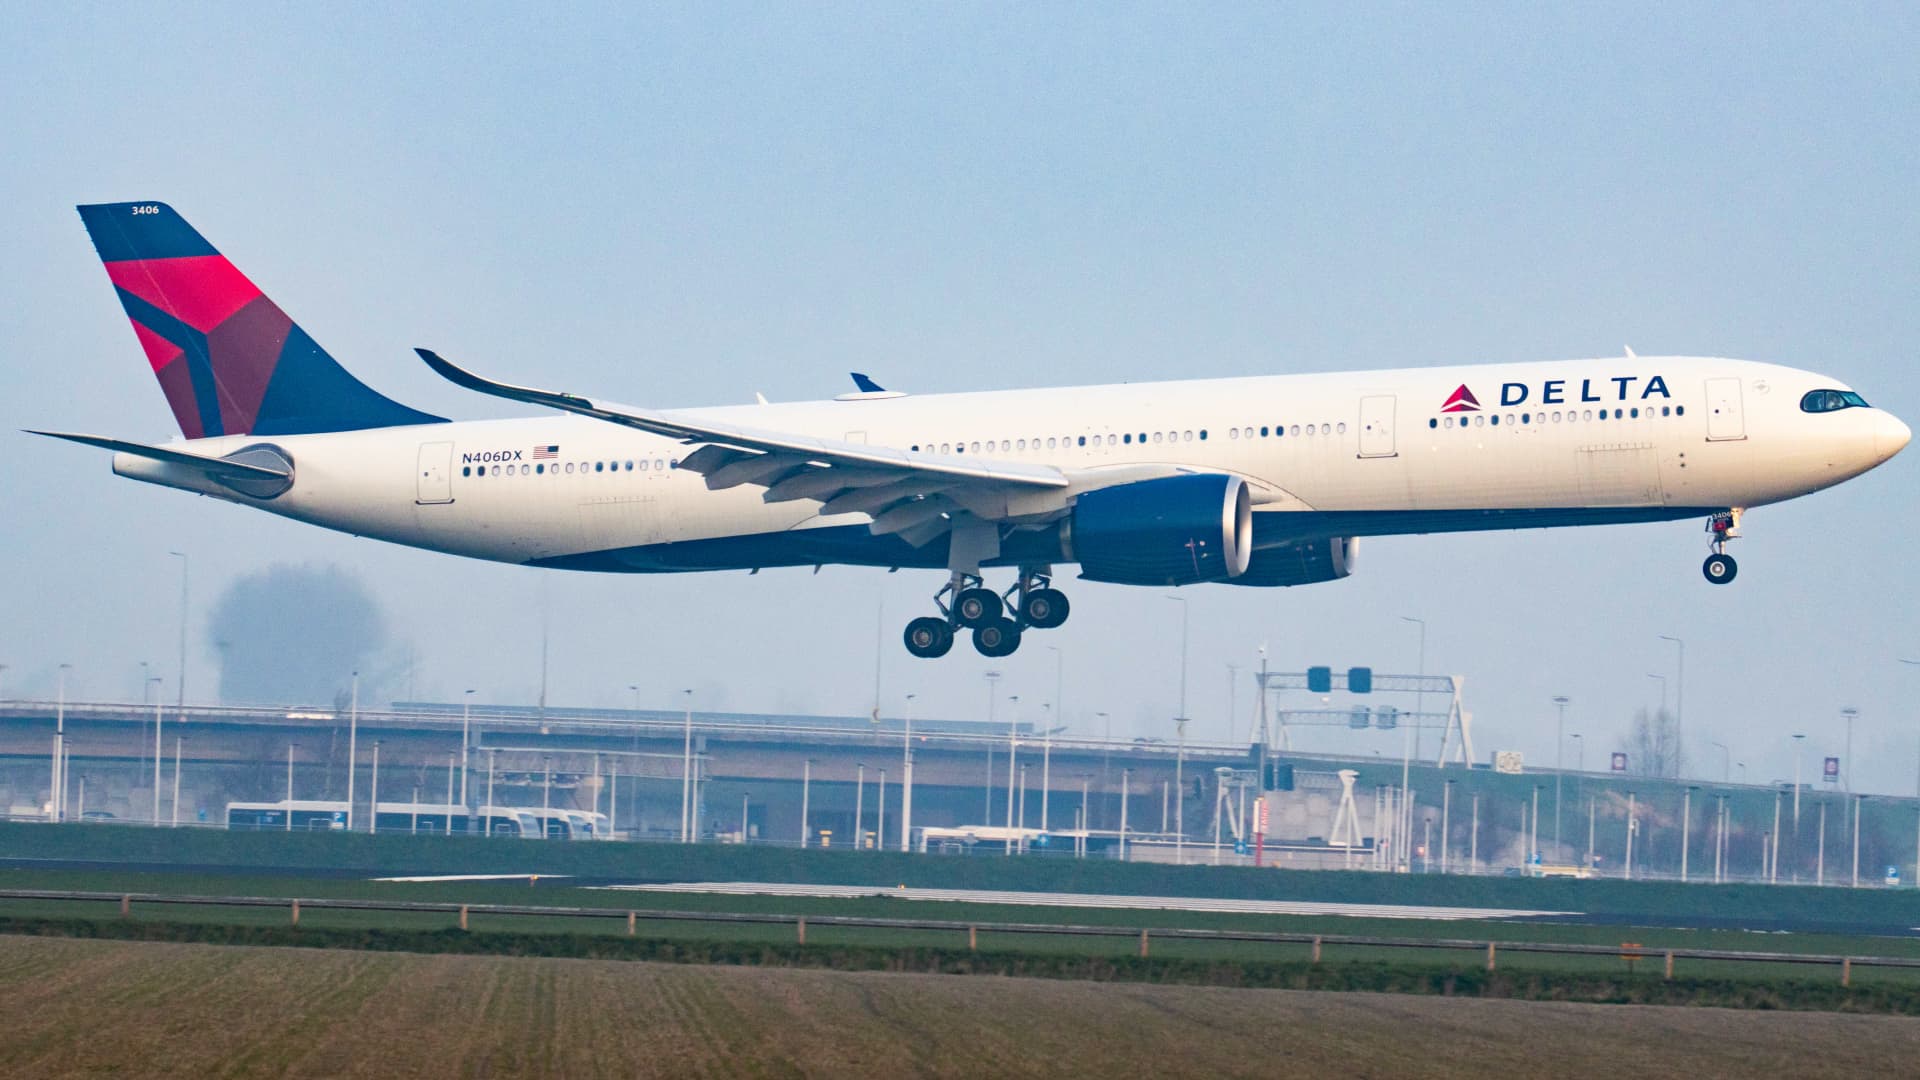 A Delta Air Lines Airbus A330neo or A330-900 aircraft with neo engine option of the European plane manufacturer, as seen on final approach for landing at Amsterdam Schiphol AMS EHAM International airport after a transatlantic long haul flight.